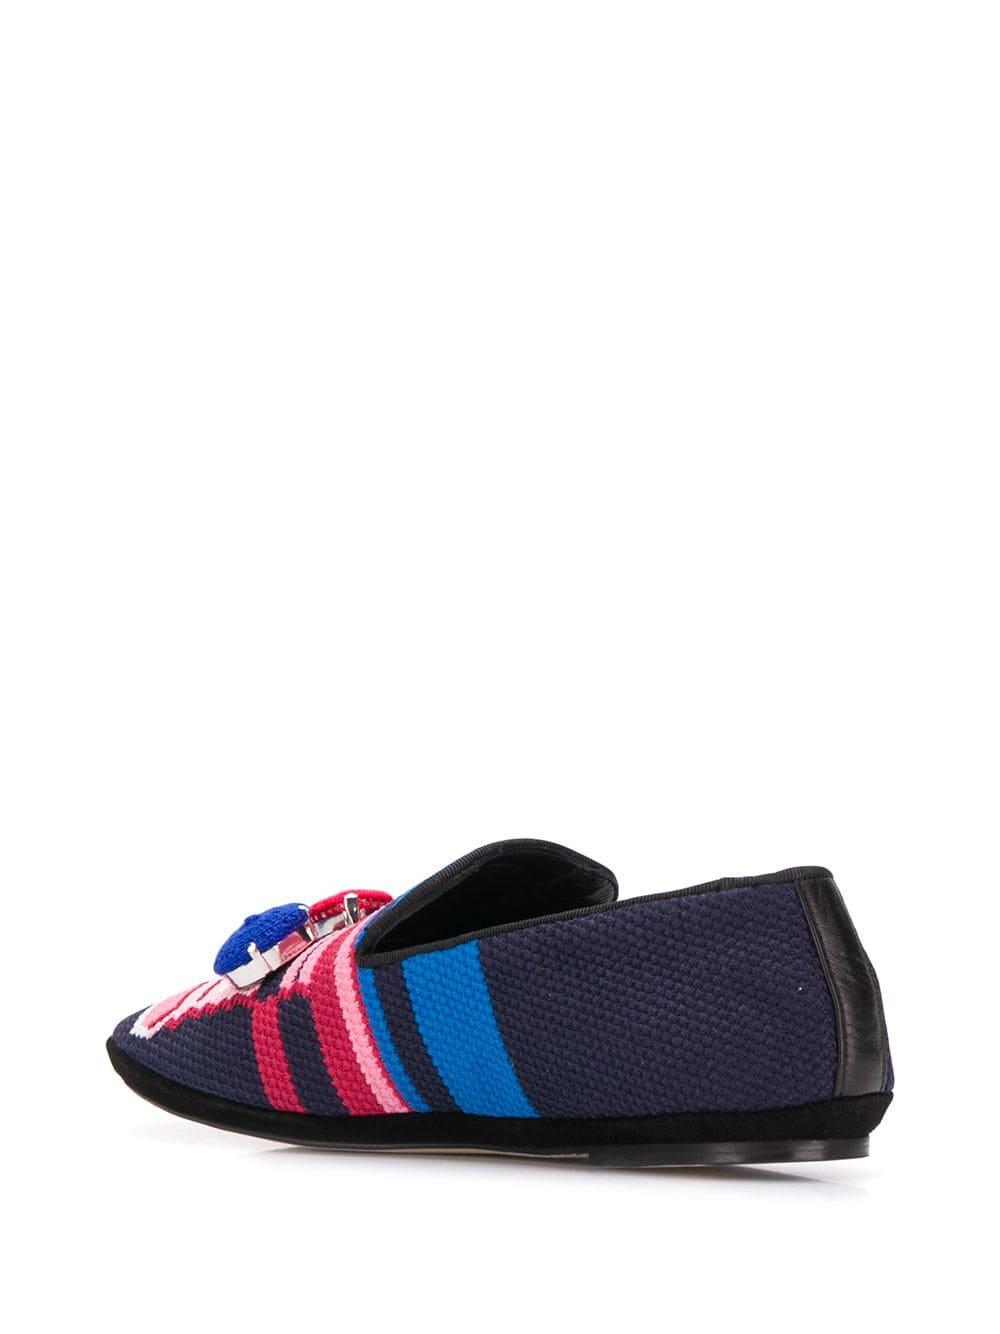 Loewe Embroidered Toe Slipper Navy/pink in Pink Navy (Blue) | Lyst